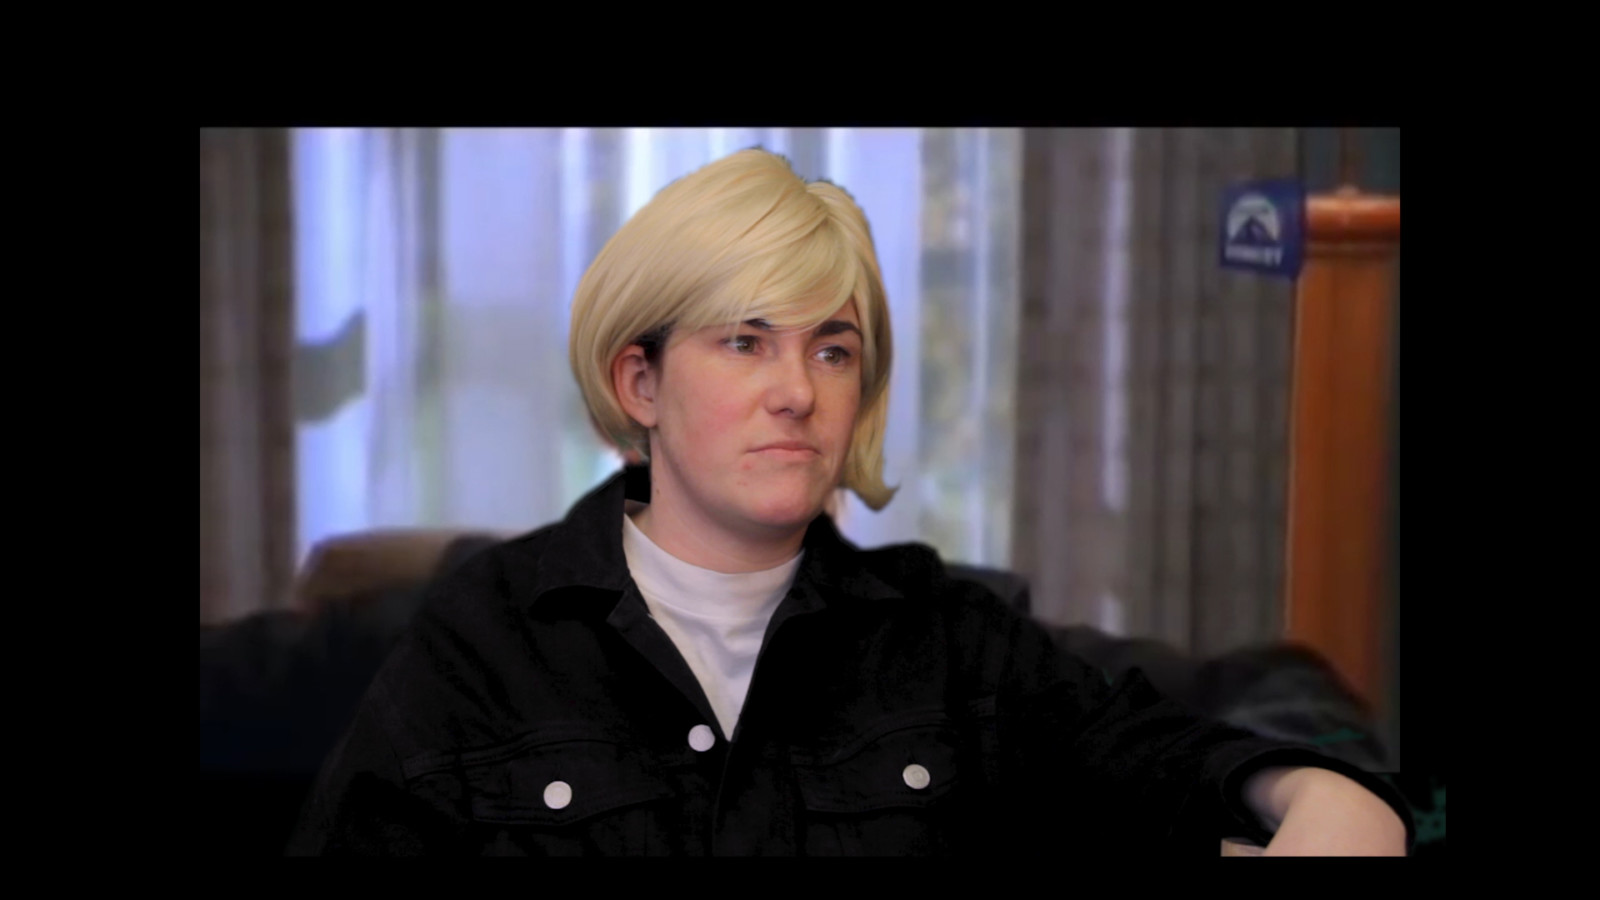 Dressed to look like Ellen Degeneres in that famous episode of Oprah, where Ellen came out. Amy wears a blonde wig a white t-shirt and a black jacket.